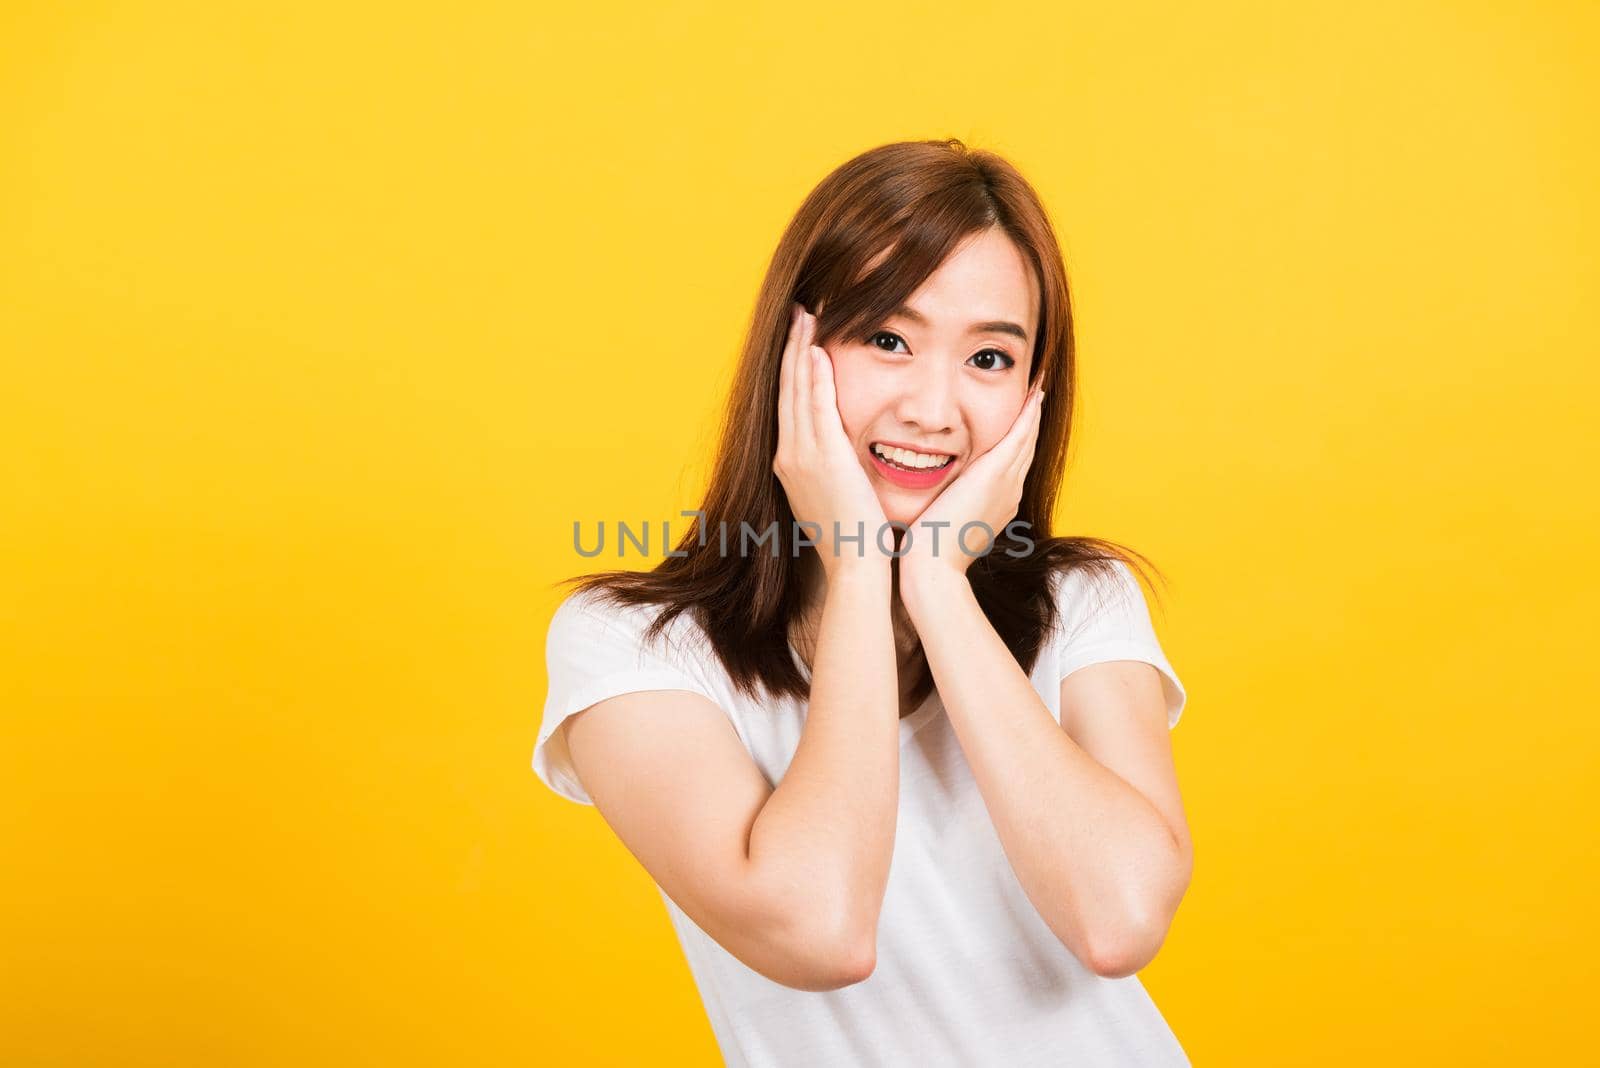 Asian happy portrait beautiful cute young woman teen stand surprised excited celebrating open mouth gesturing palms on face looking to camera isolated, studio shot yellow background with copy space